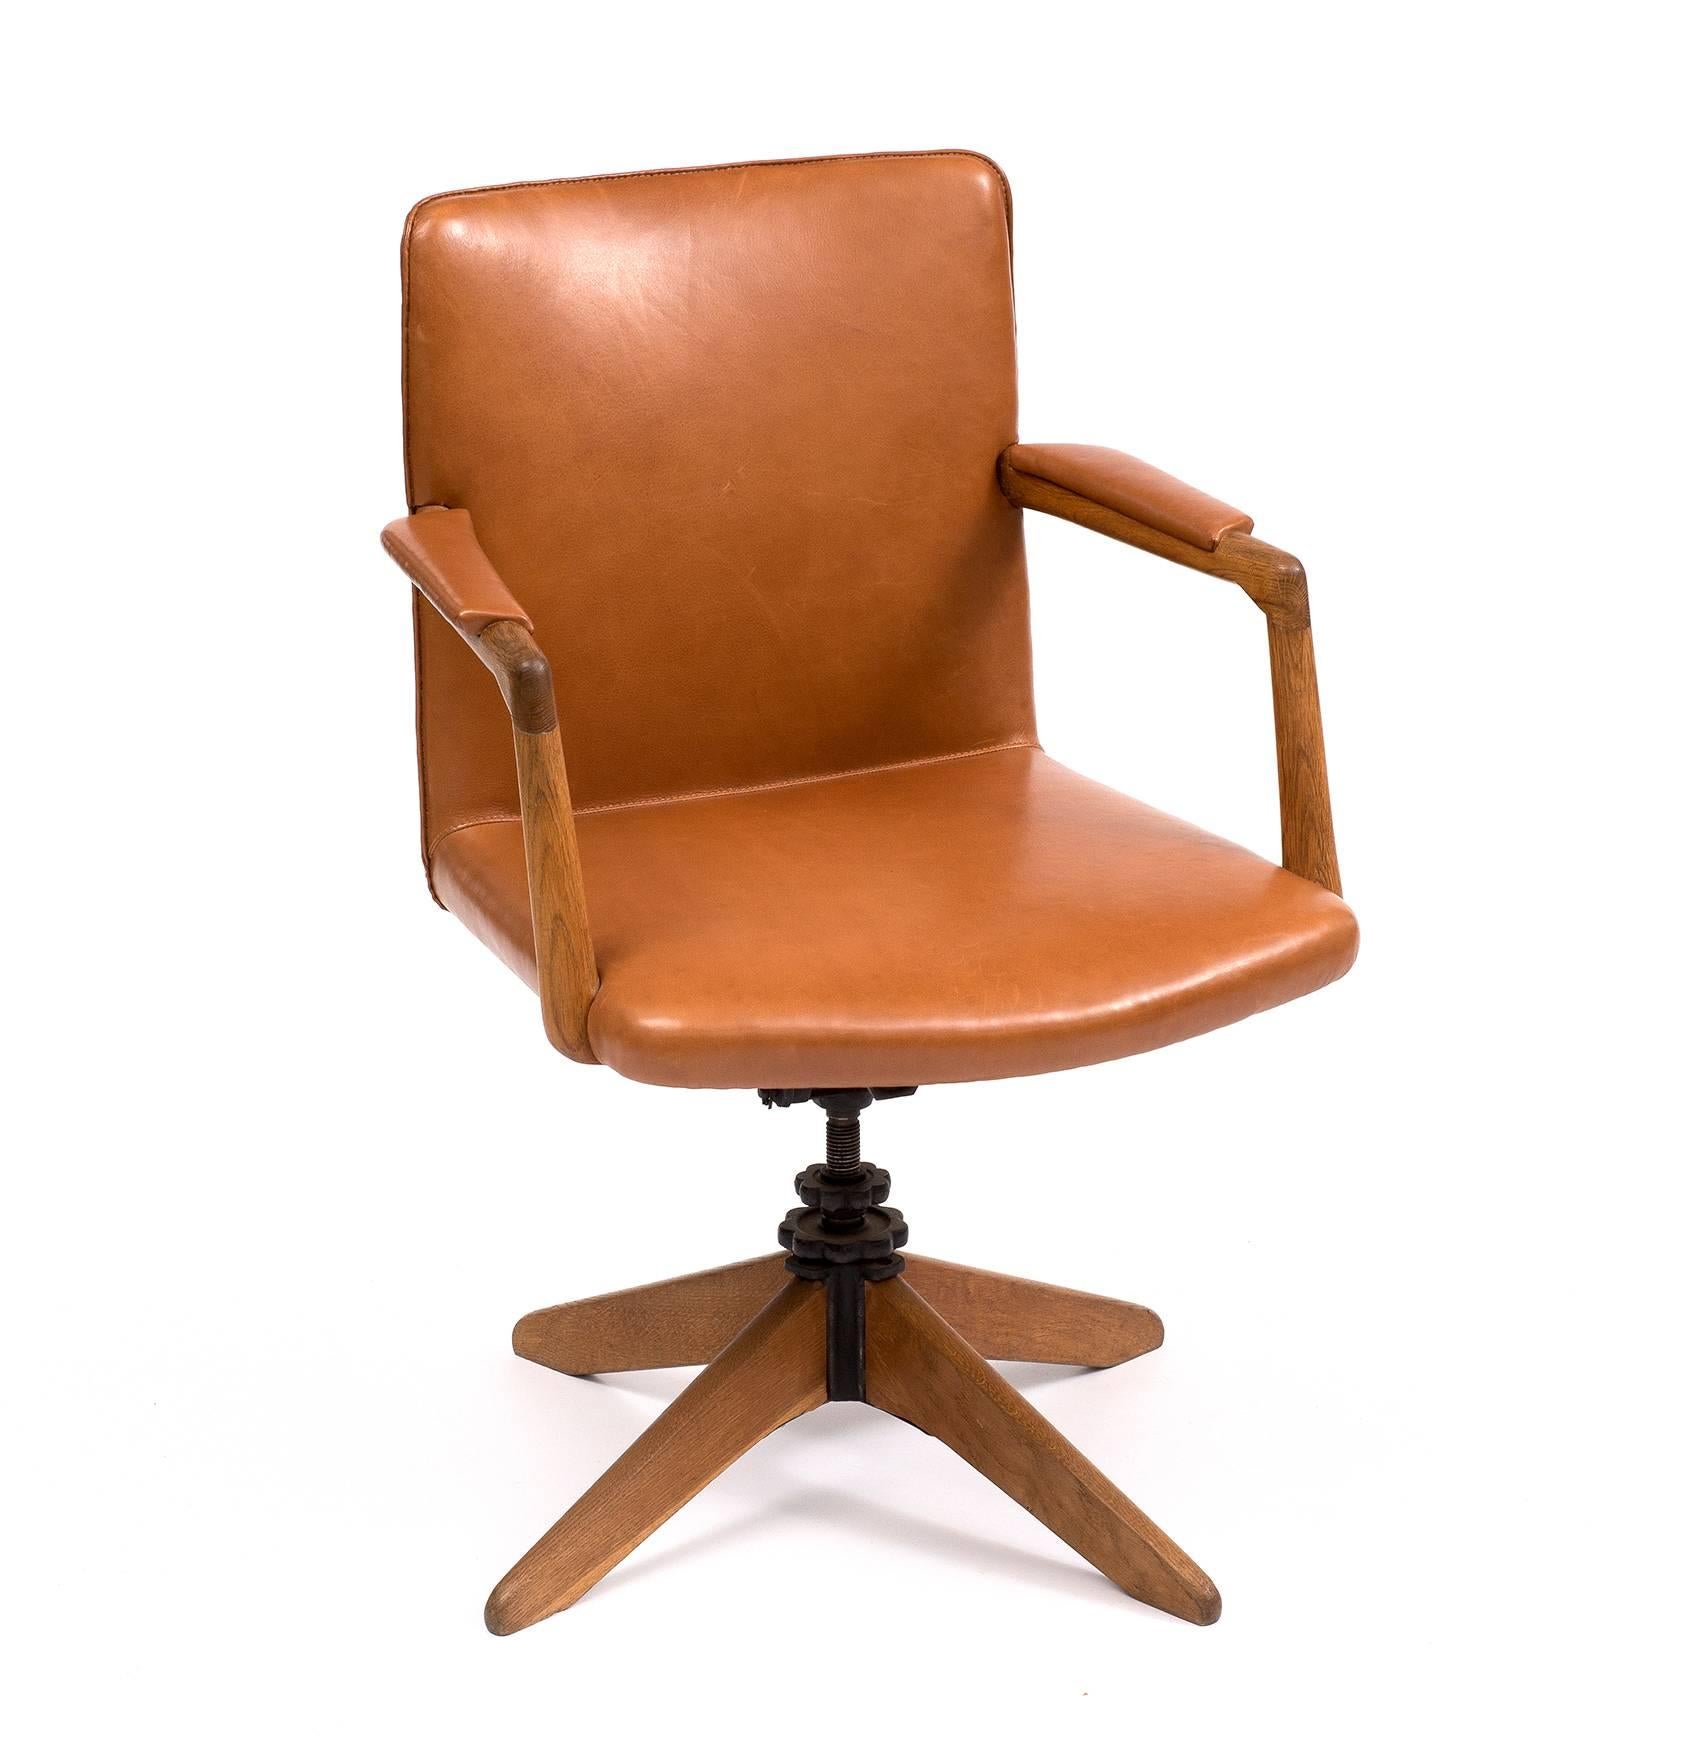 A rare and early design in oak with swivel and tilt function by Hans Wegner. Seat and back in carmel leather. Designed in 1940s. This example manufactured 1940s-1950s by Planmobel.
 